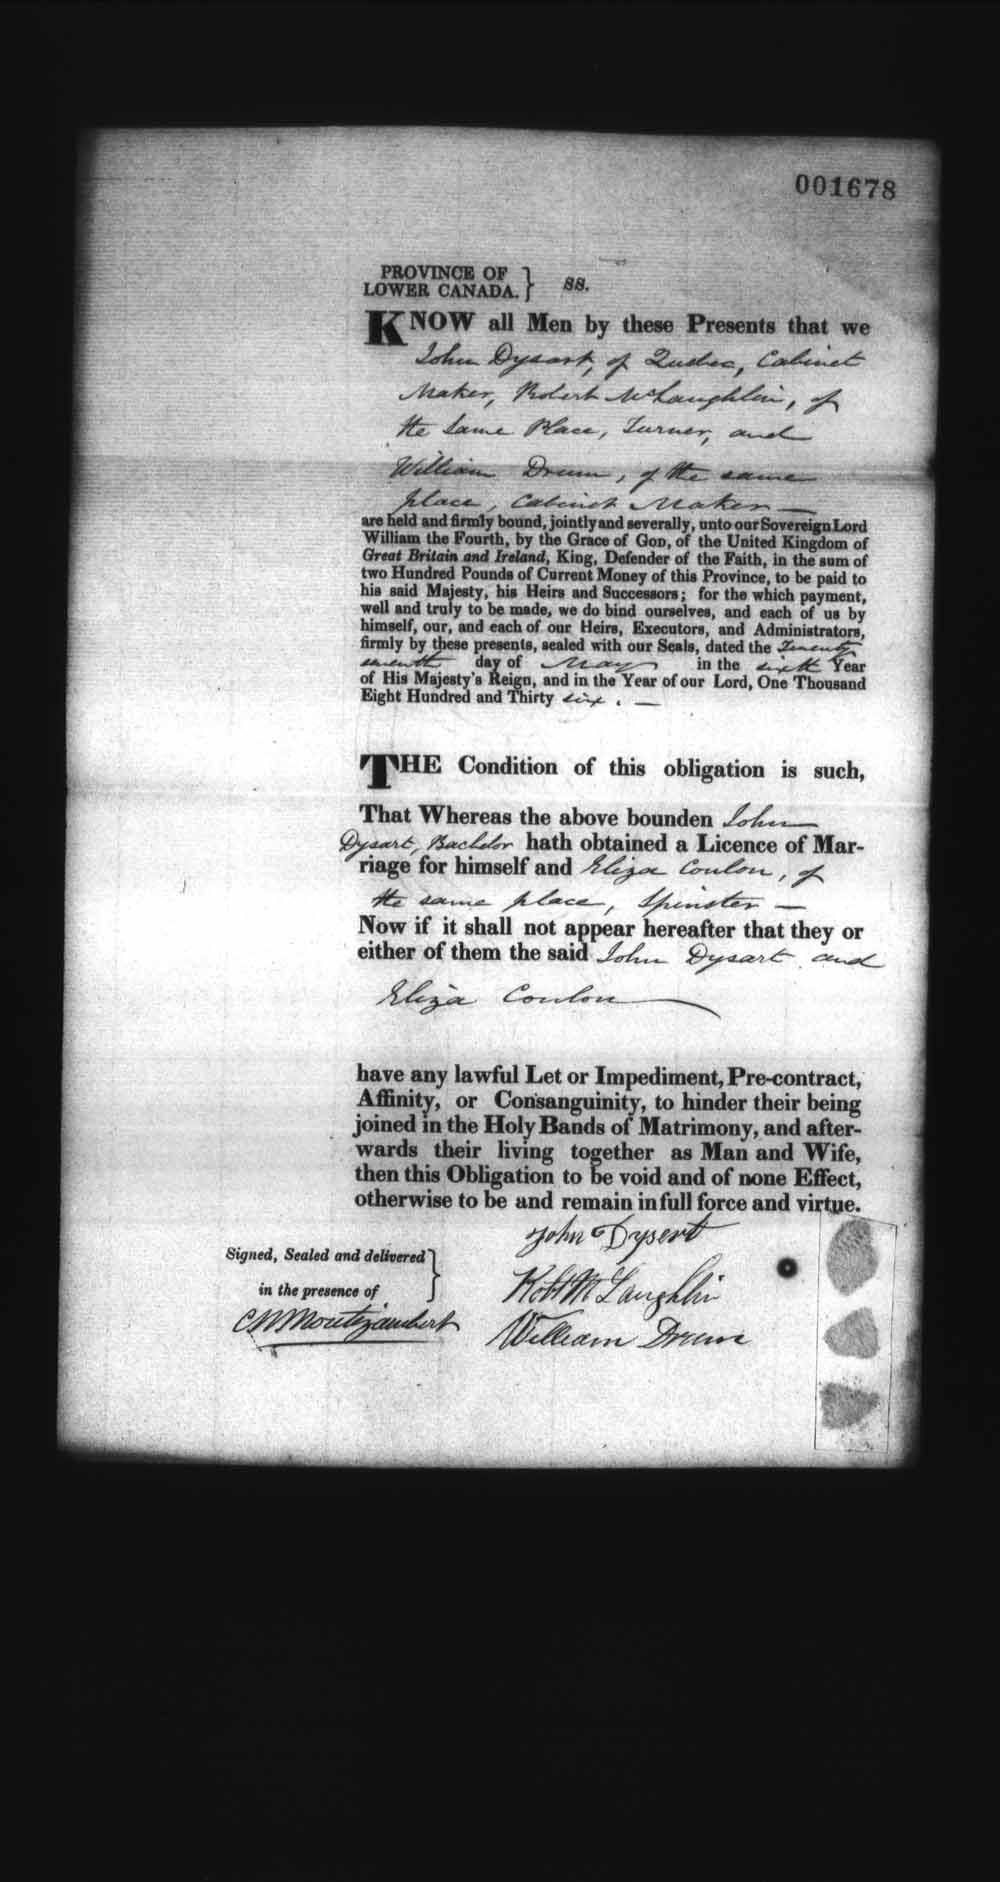 Digitized page of Upper and Lower Canada Marriage Bonds (1779-1865) for Image No.: e008238003